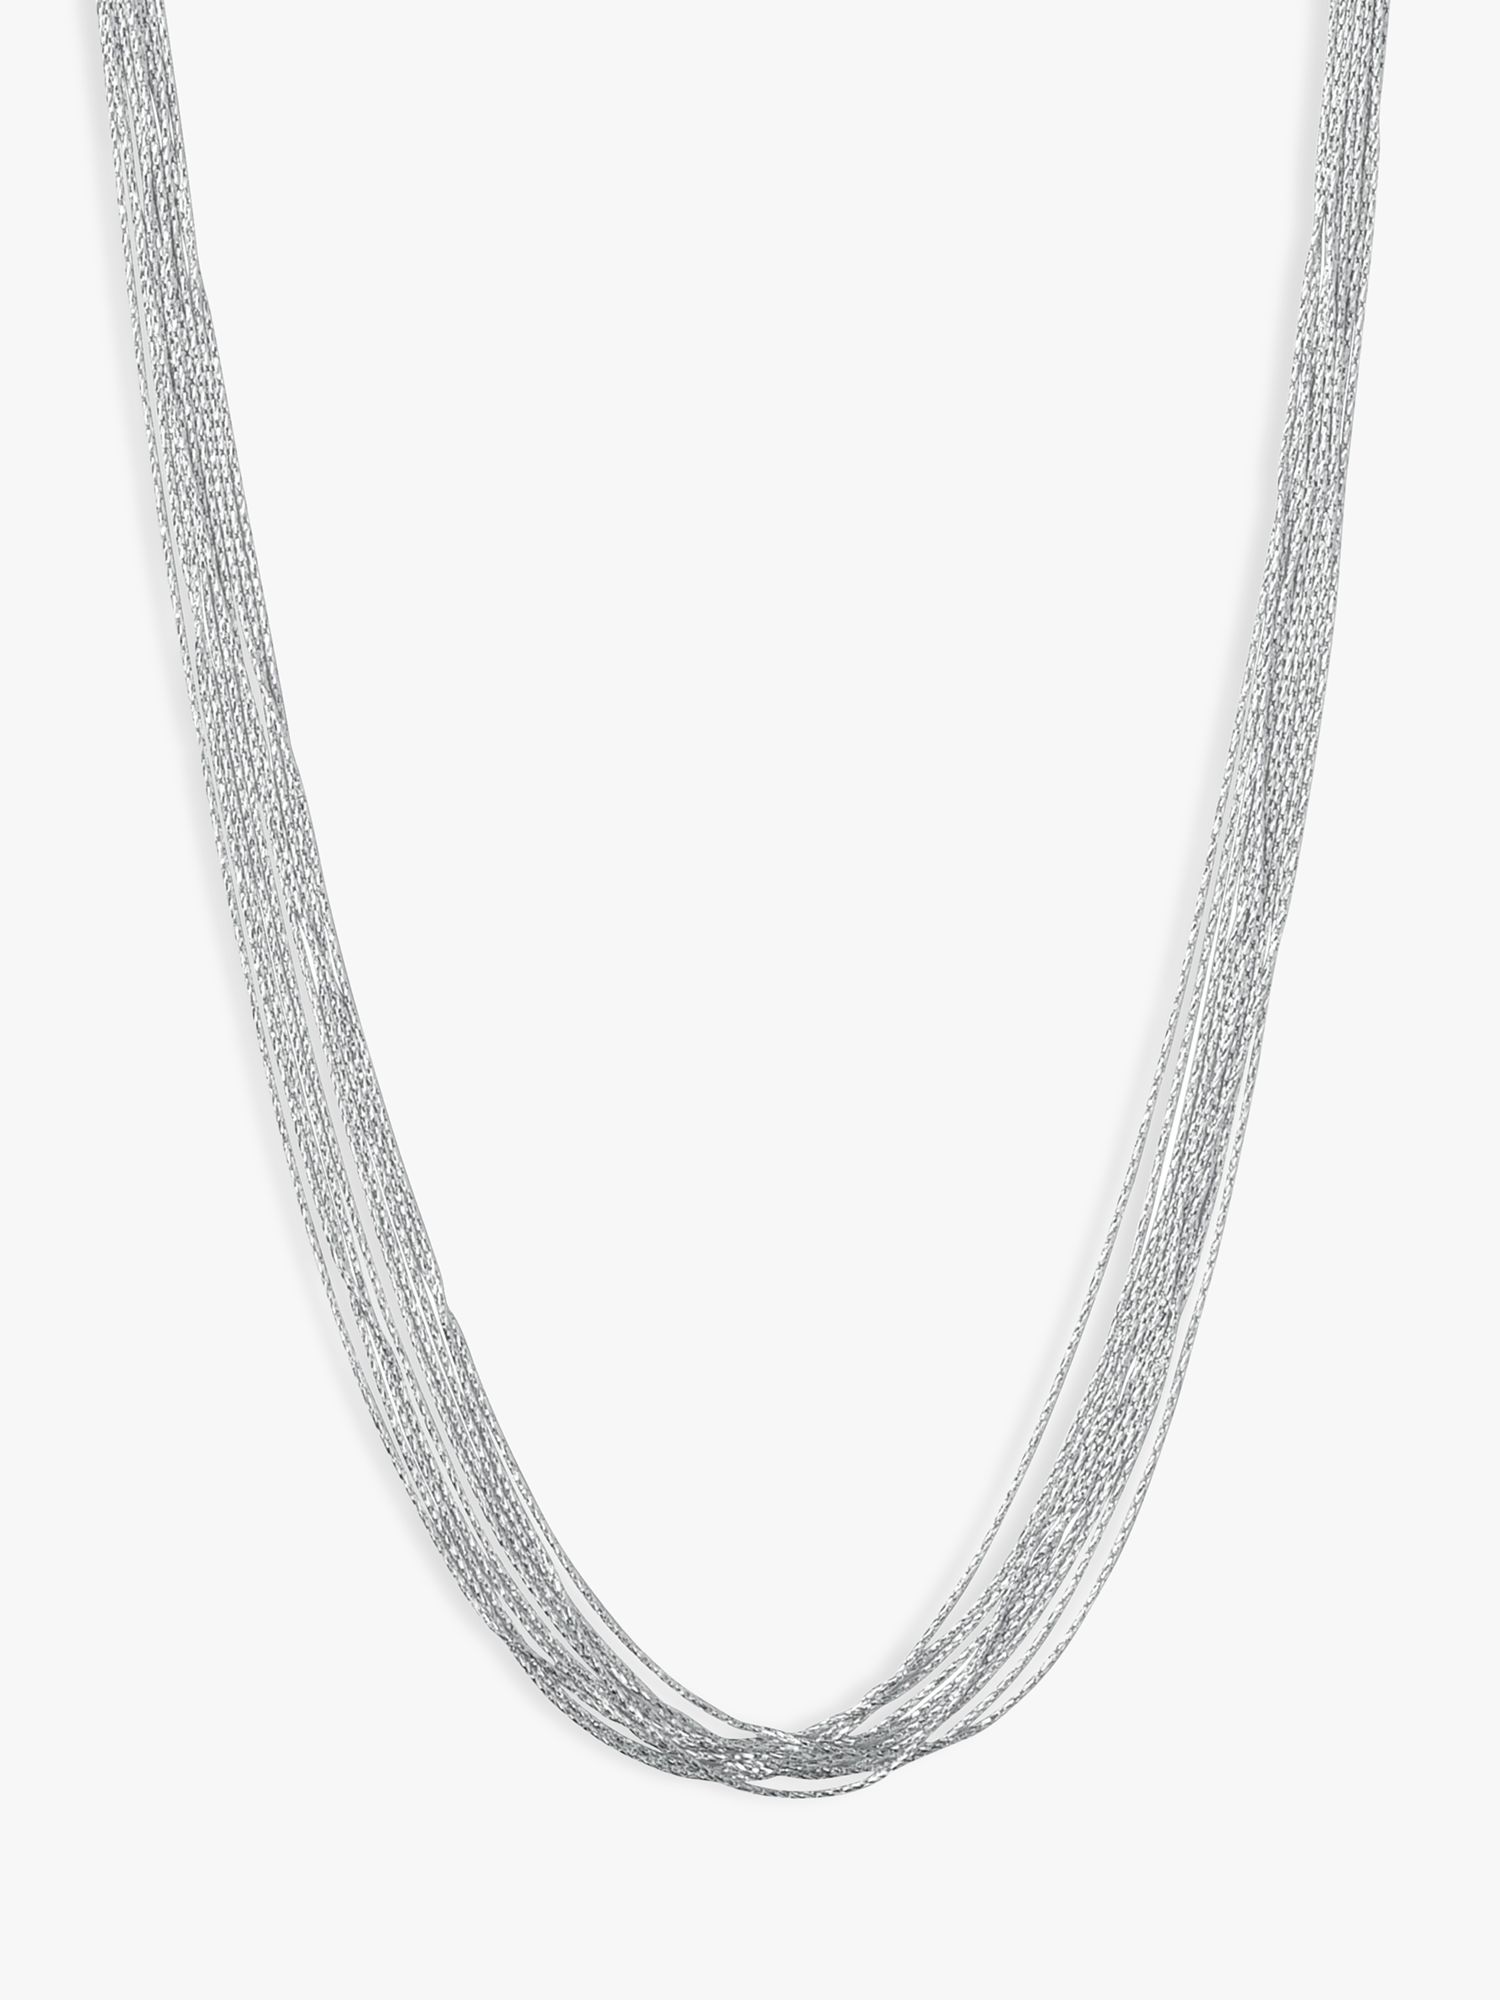 Links of London Essentials 10 Row Necklace